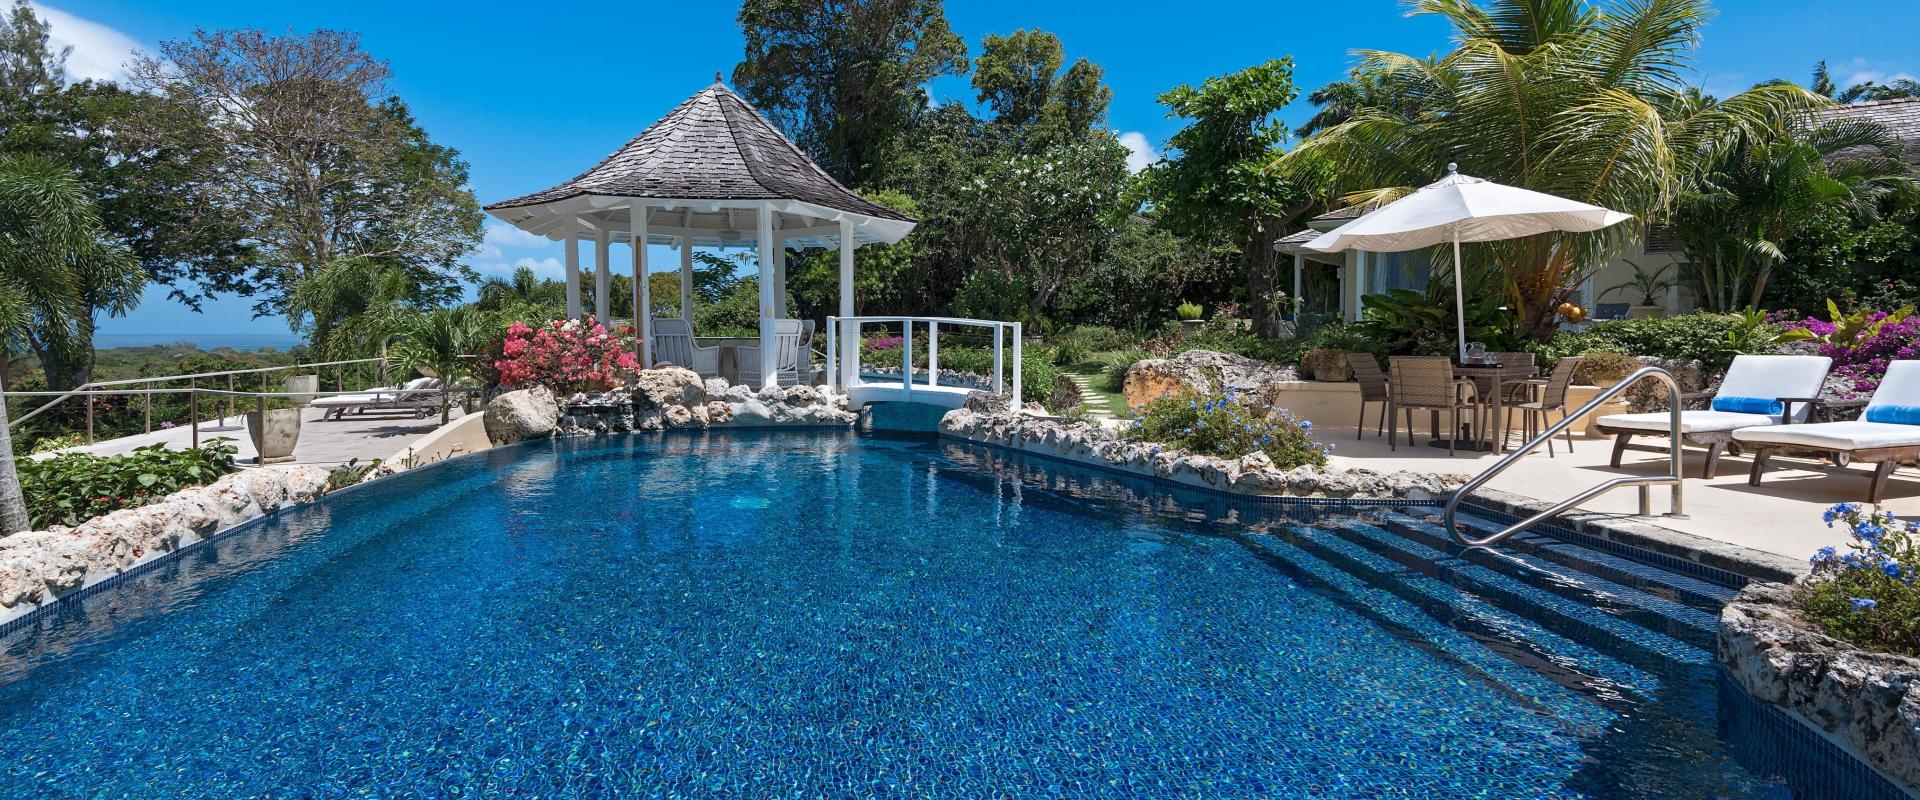 Point of View Holiday Rental In Sandy Lane Barbados Swimming Pool and Gazebo